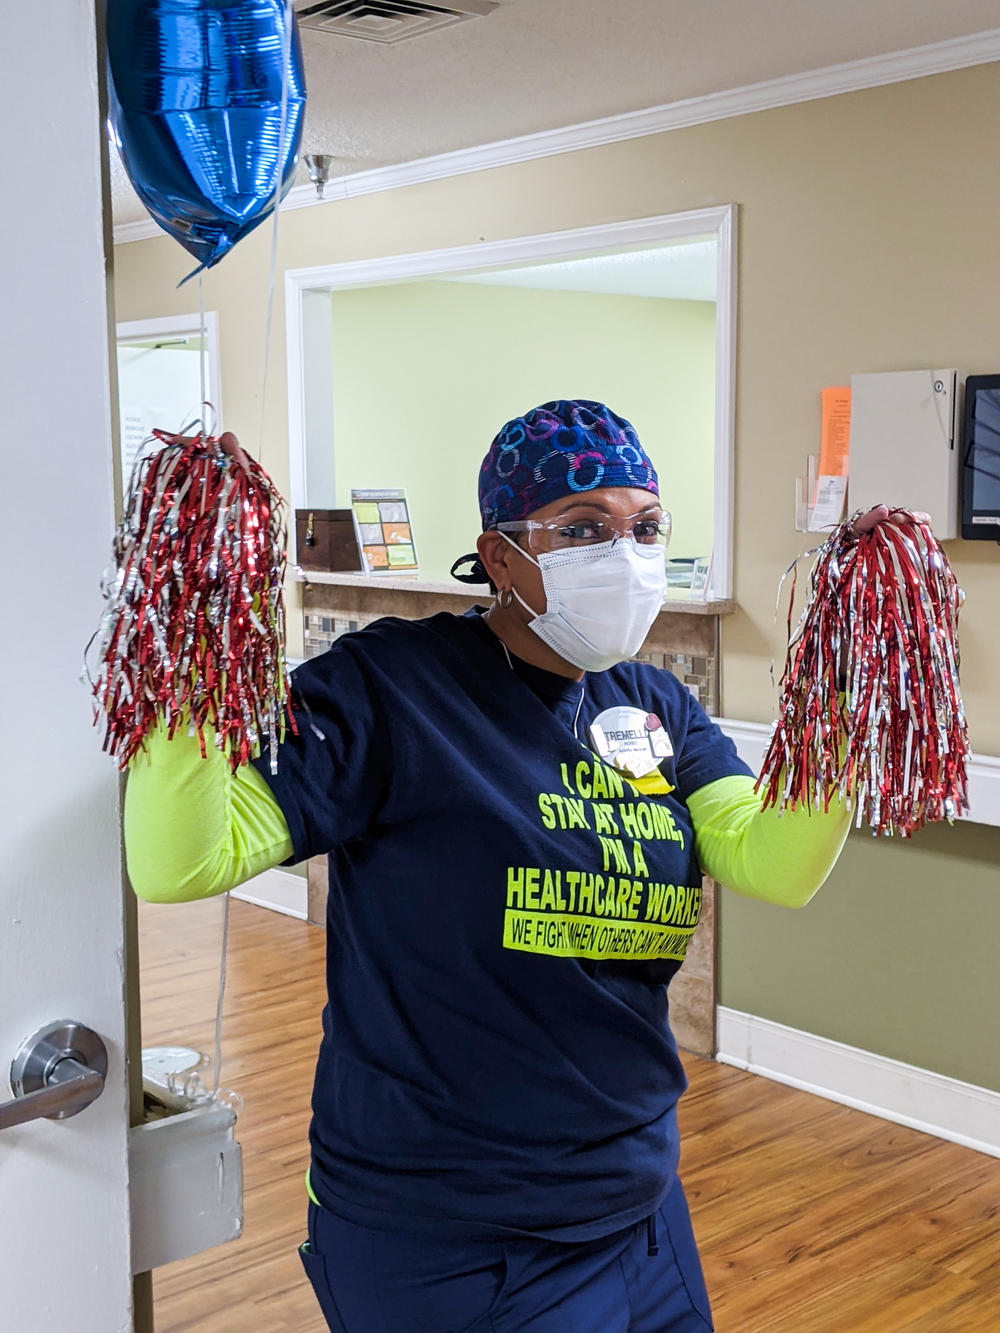 Tremellia Hobbs, activities director at the Brian Center/Cabarrus nursing home, cheers on her co-workers as they receive COVID-19 vaccines on Jan. 14, 2021.